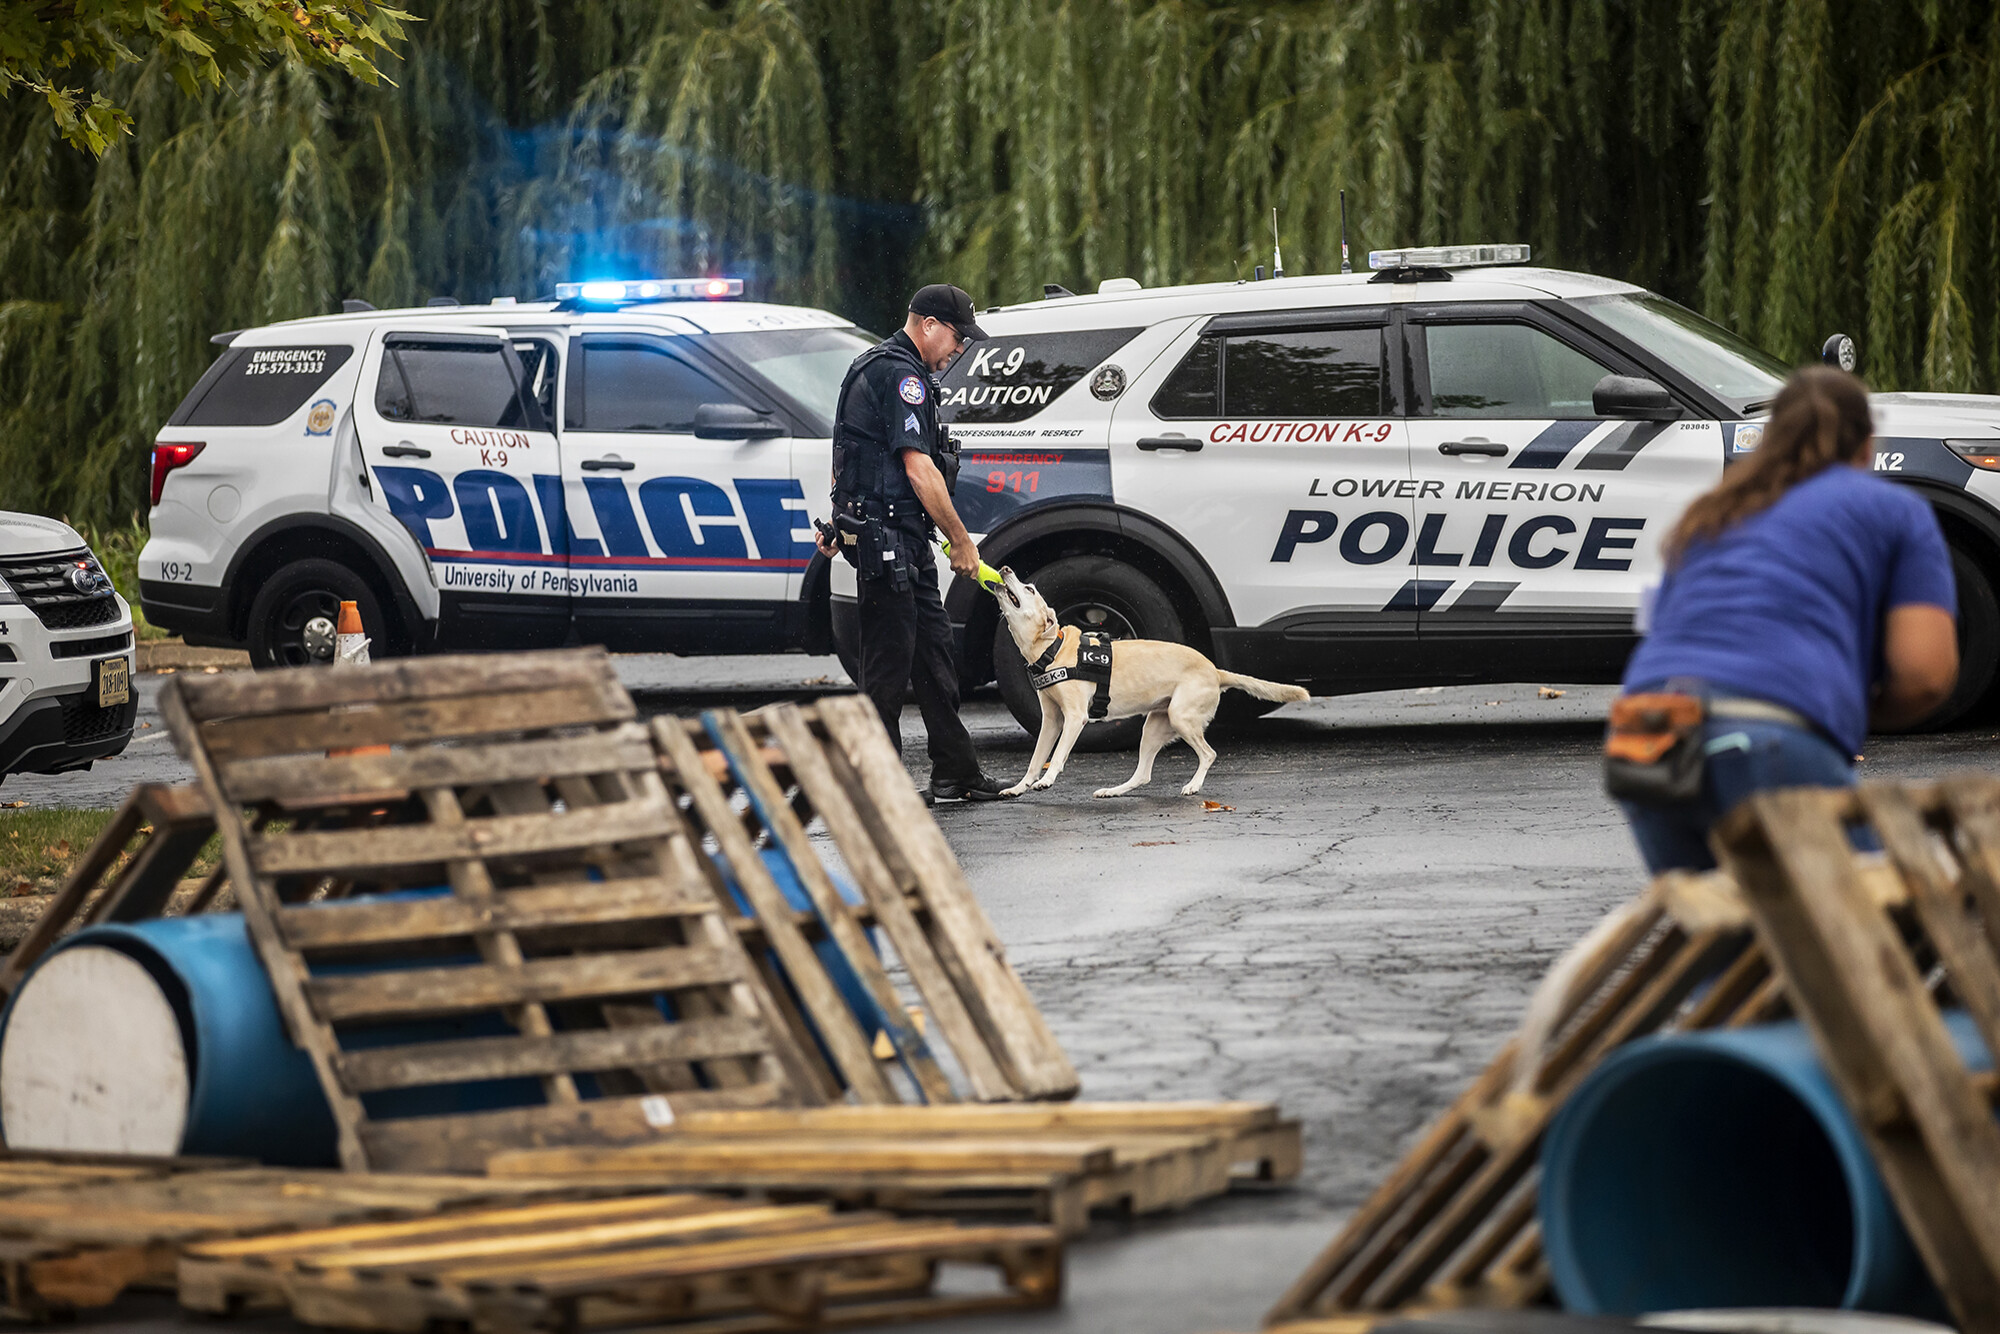 police demo at penn working dog center event